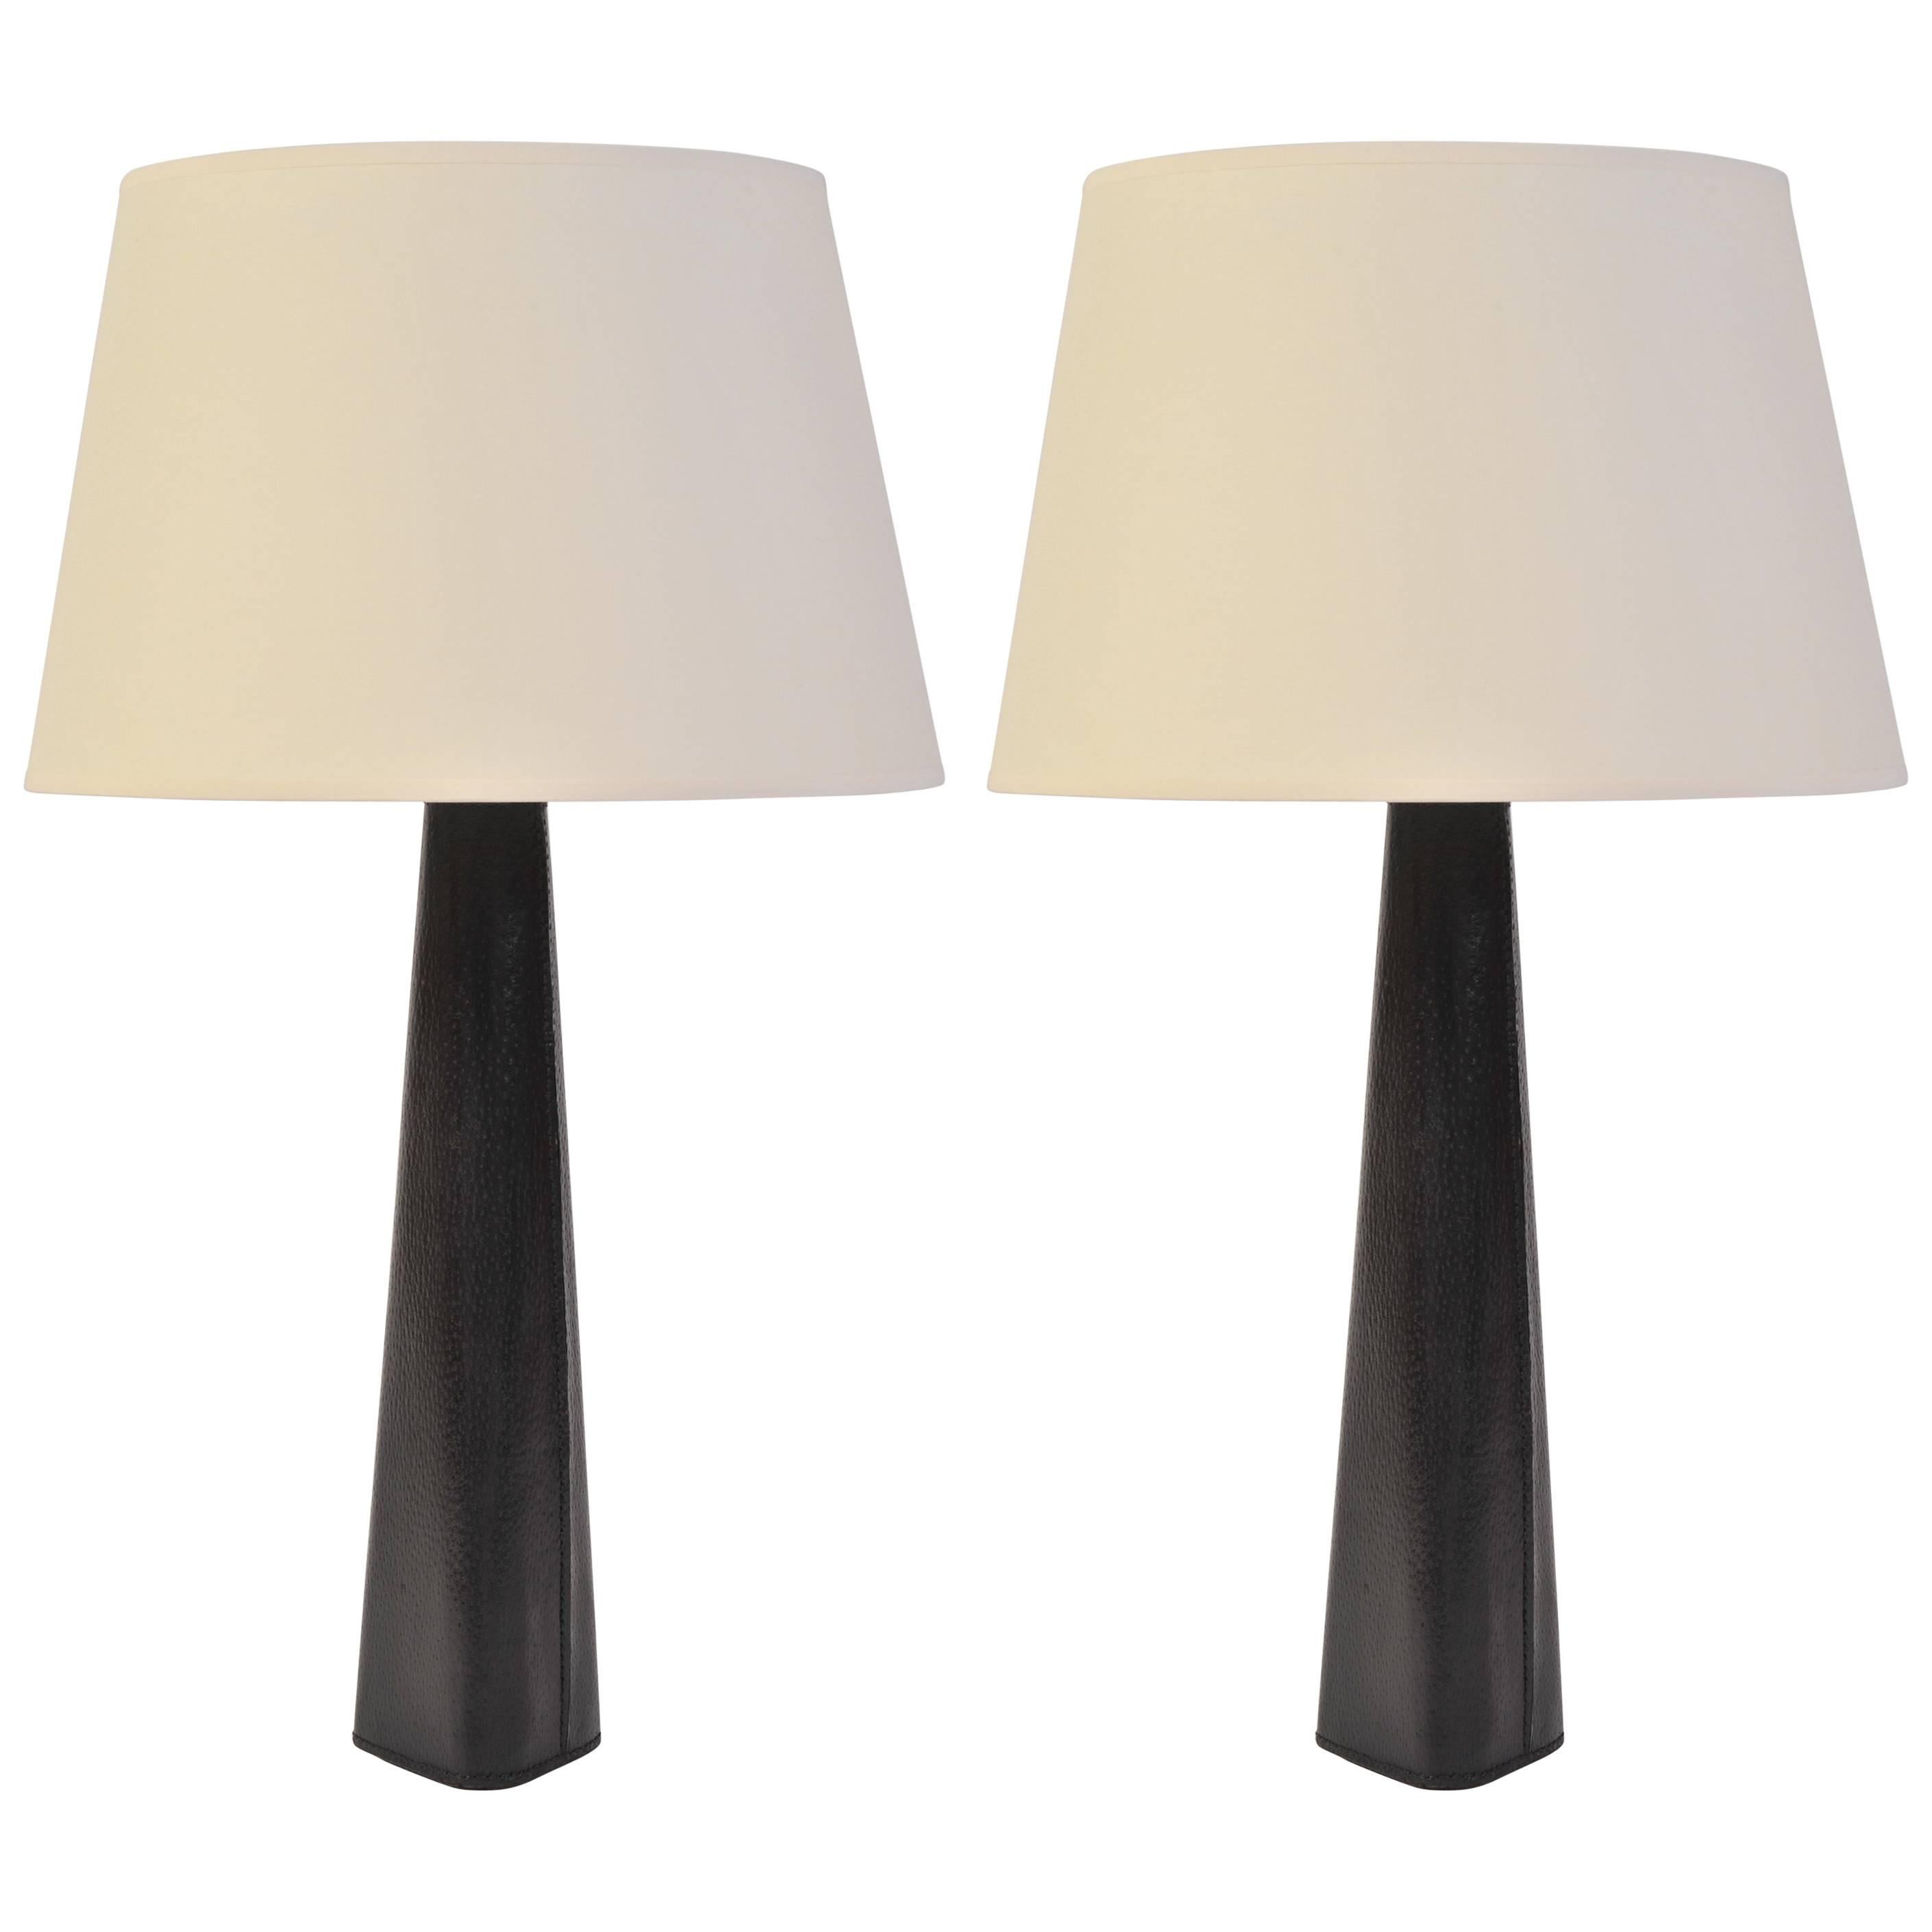 Pair of 1950s Black Stitched Leather Table Lamps